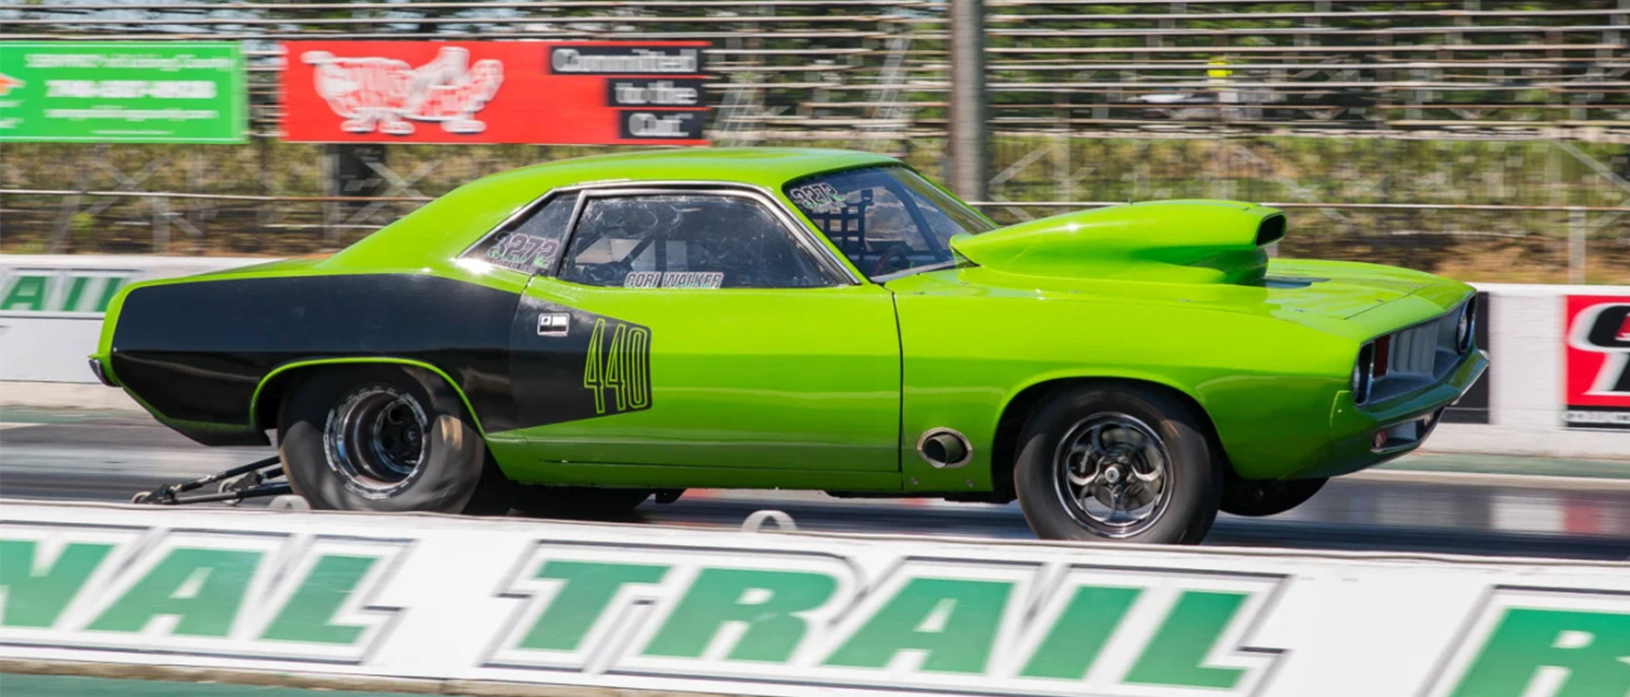 1972 plymouth barracuda on the starting line of a drag strip